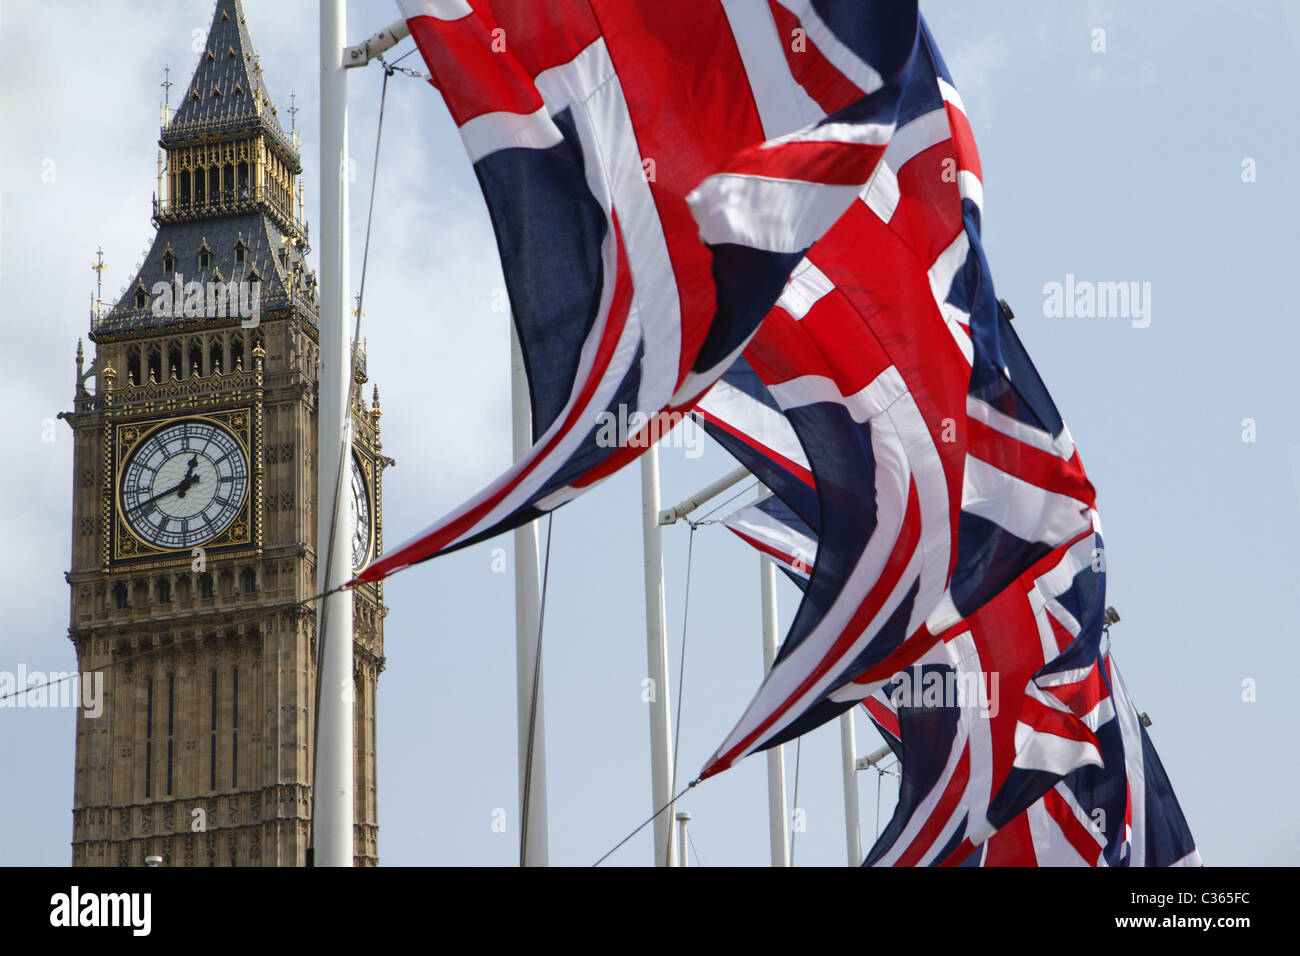 Union Flags flying in front of Big Ben, London, UK Stock Photo